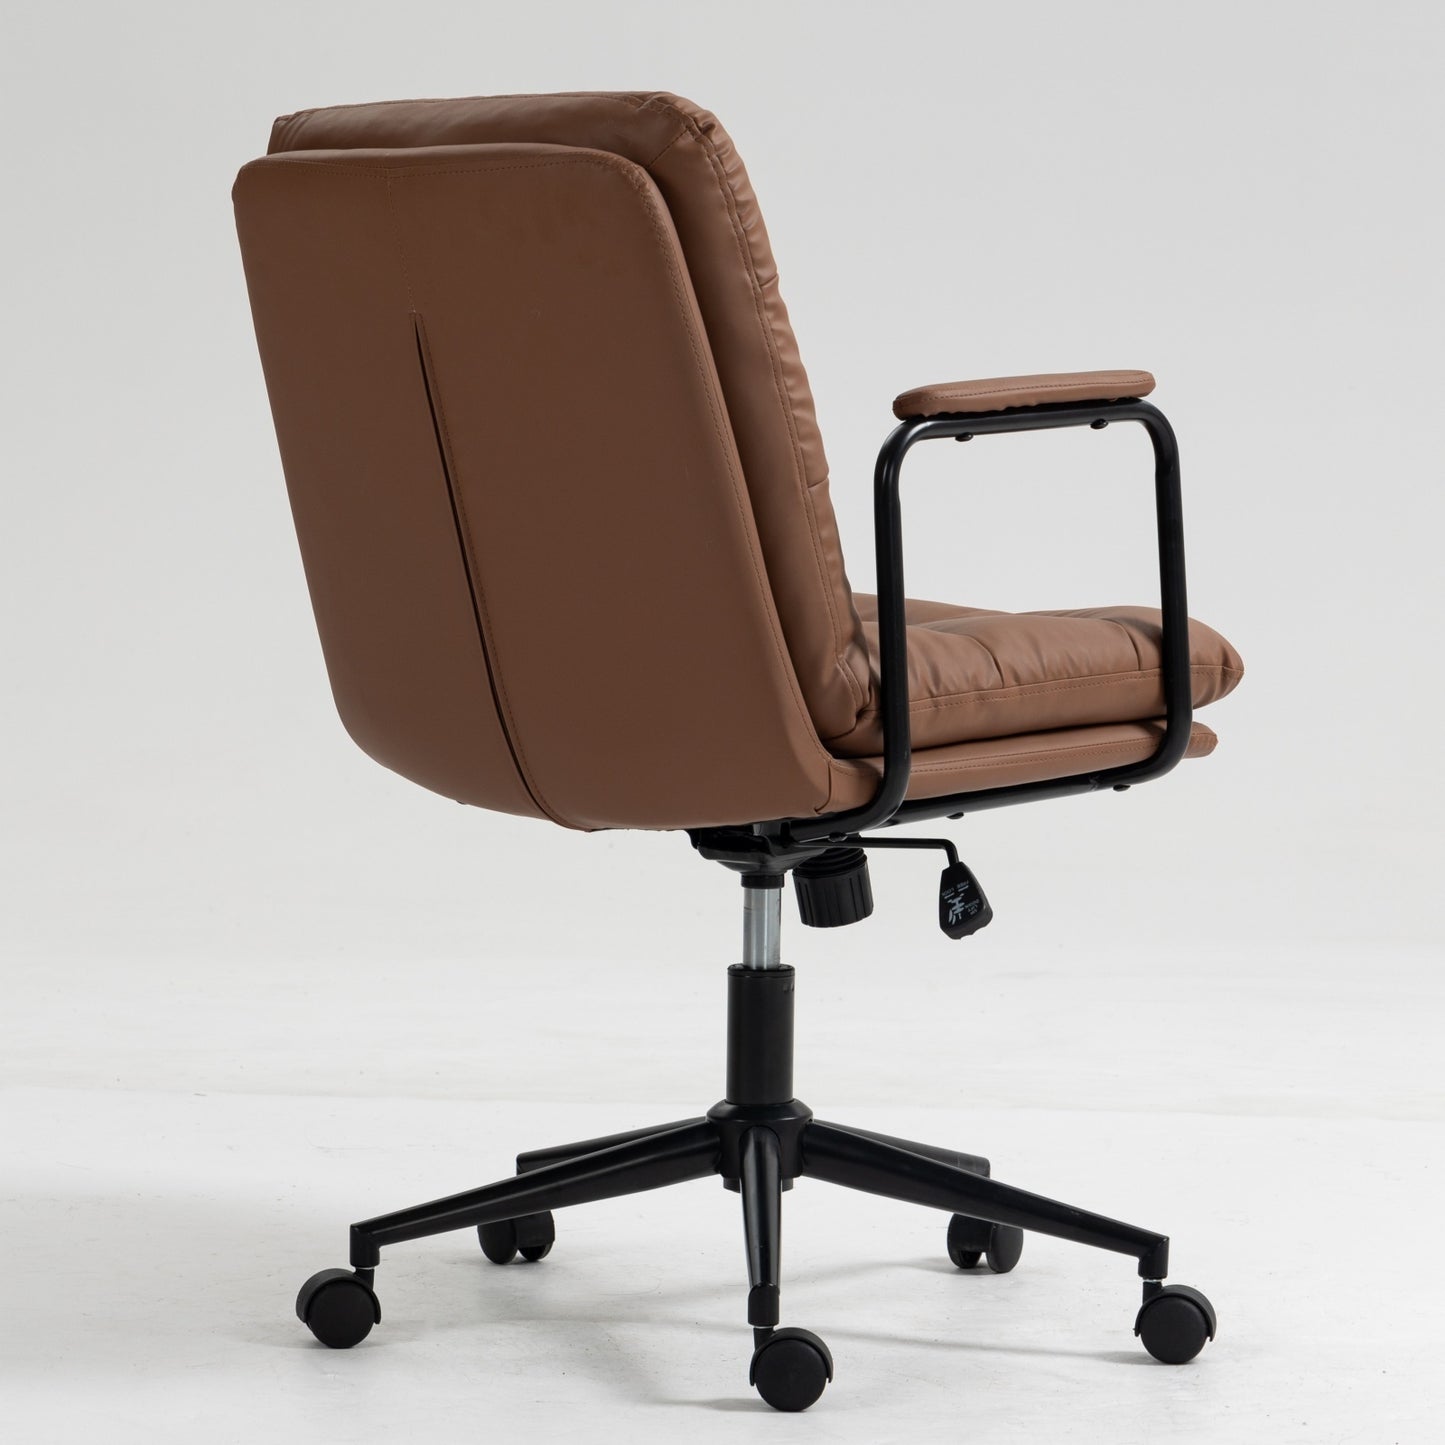 Royton Computer Rolling Swivel Chair in Brown PU Leather